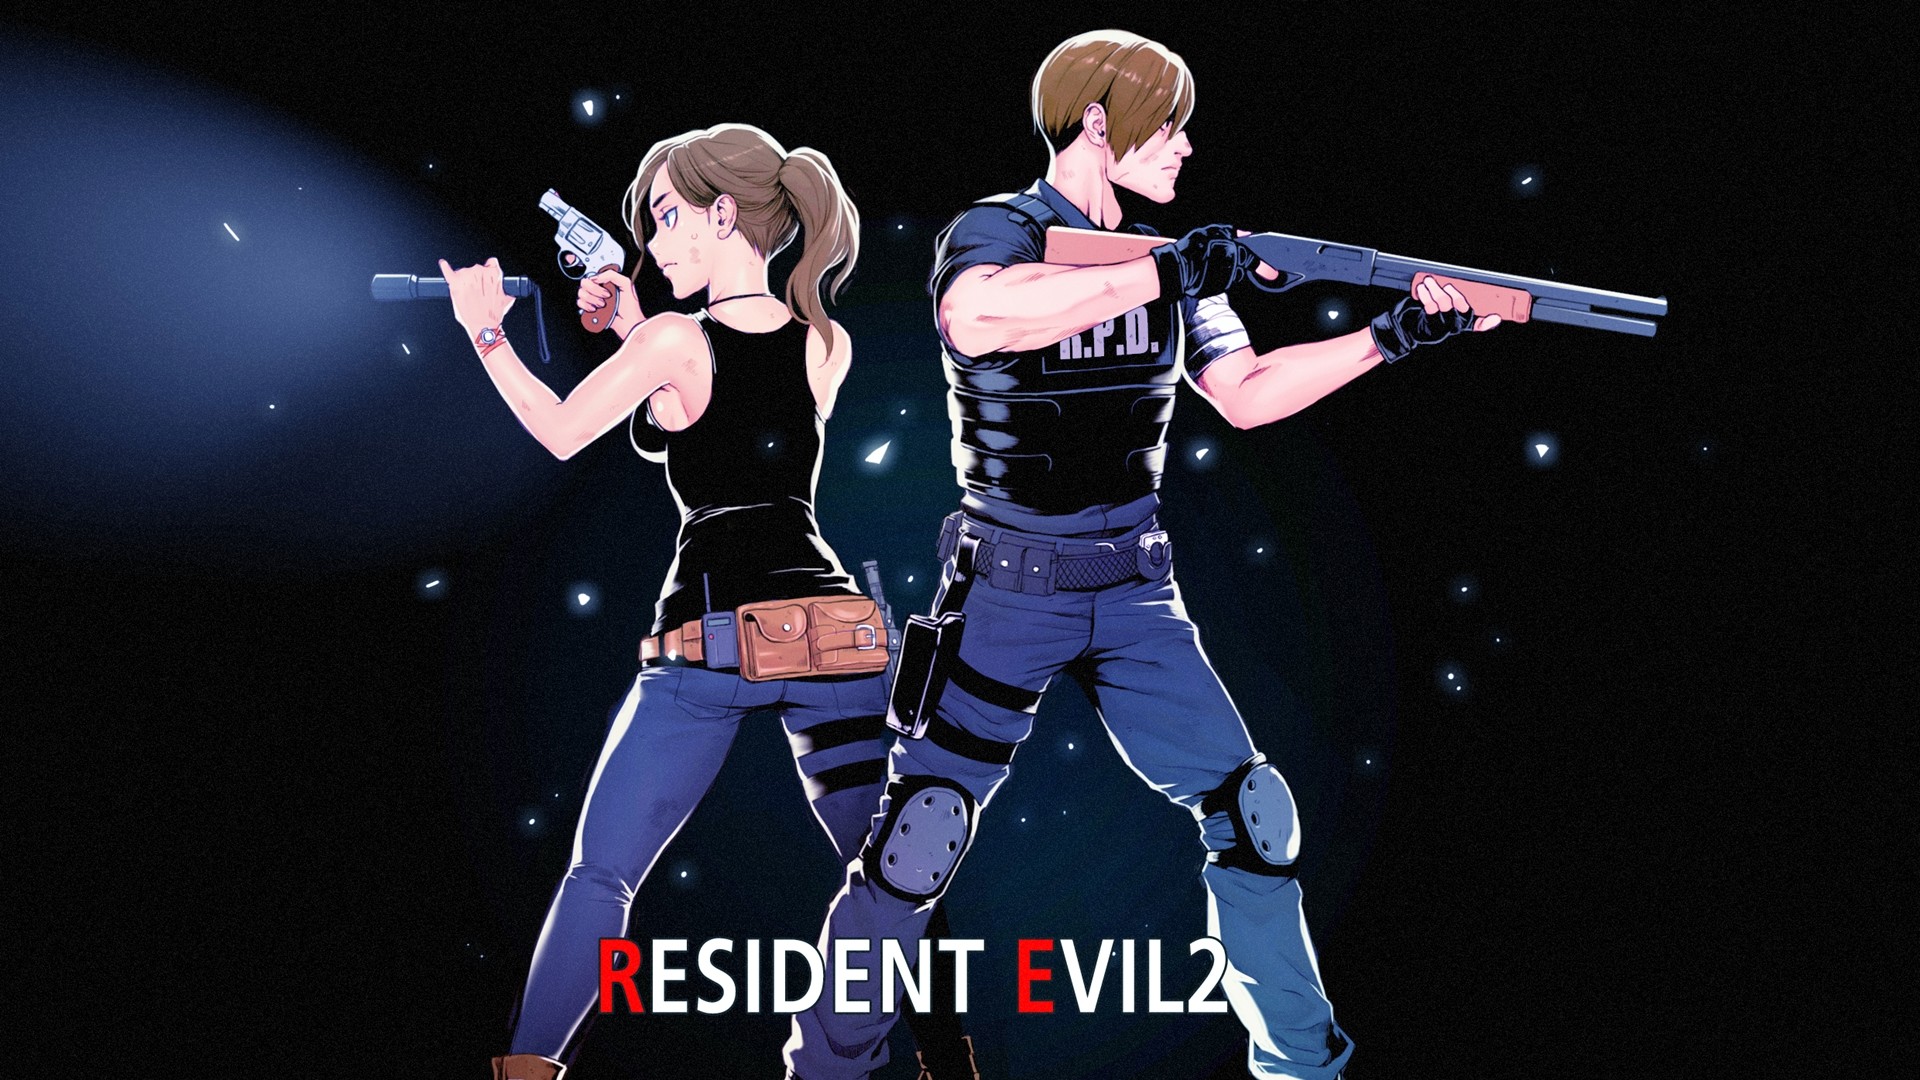 1920x1080 HD Wallpaper Claire Redfield, Leon S. Kennedy, Resident Evil 2